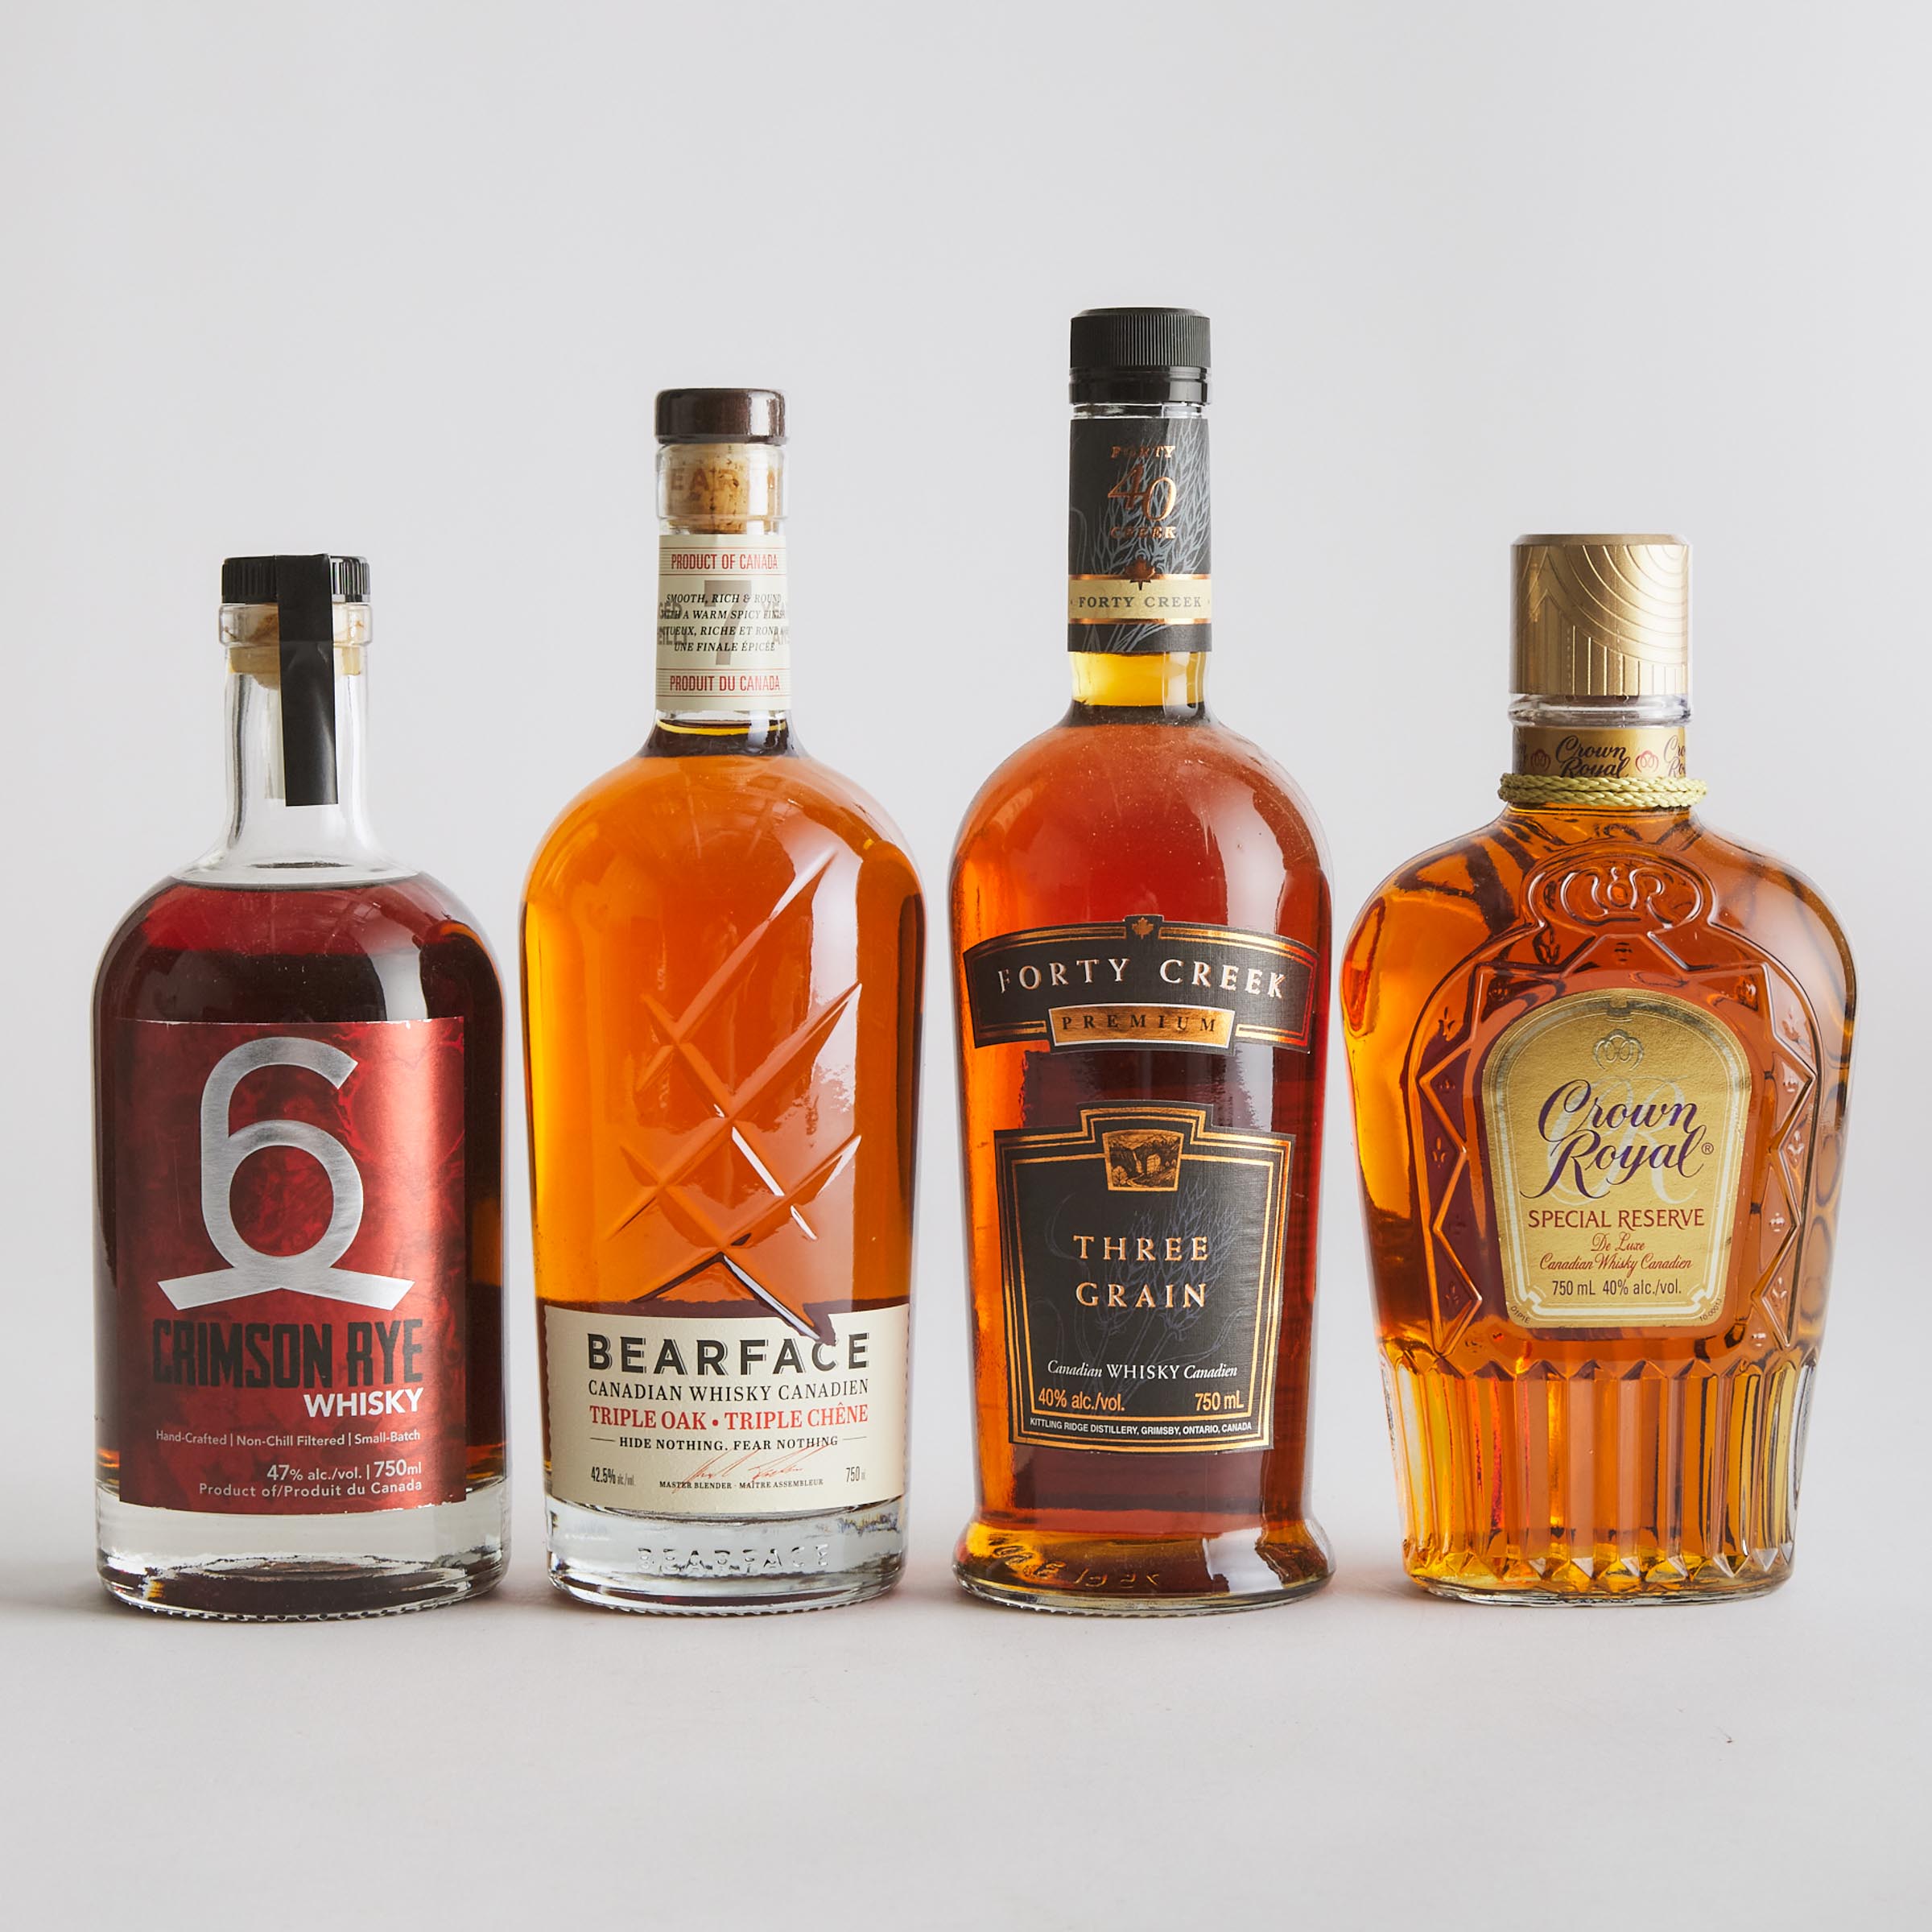 BEARFACE CANADIAN WHISKY 7 YEARS (ONE 750 ML)
CROWN ROYAL DE LUX SPECIAL RESERVE CANADIAN WHISKY NAS (ONE 750 ML)
FORTY CREEK THREE GRAIN CANADIAN WHISKY NAS (ONE 750 ML)
GILEAD CRIMSON RYE WHISKY NAS (ONE 750 ML)